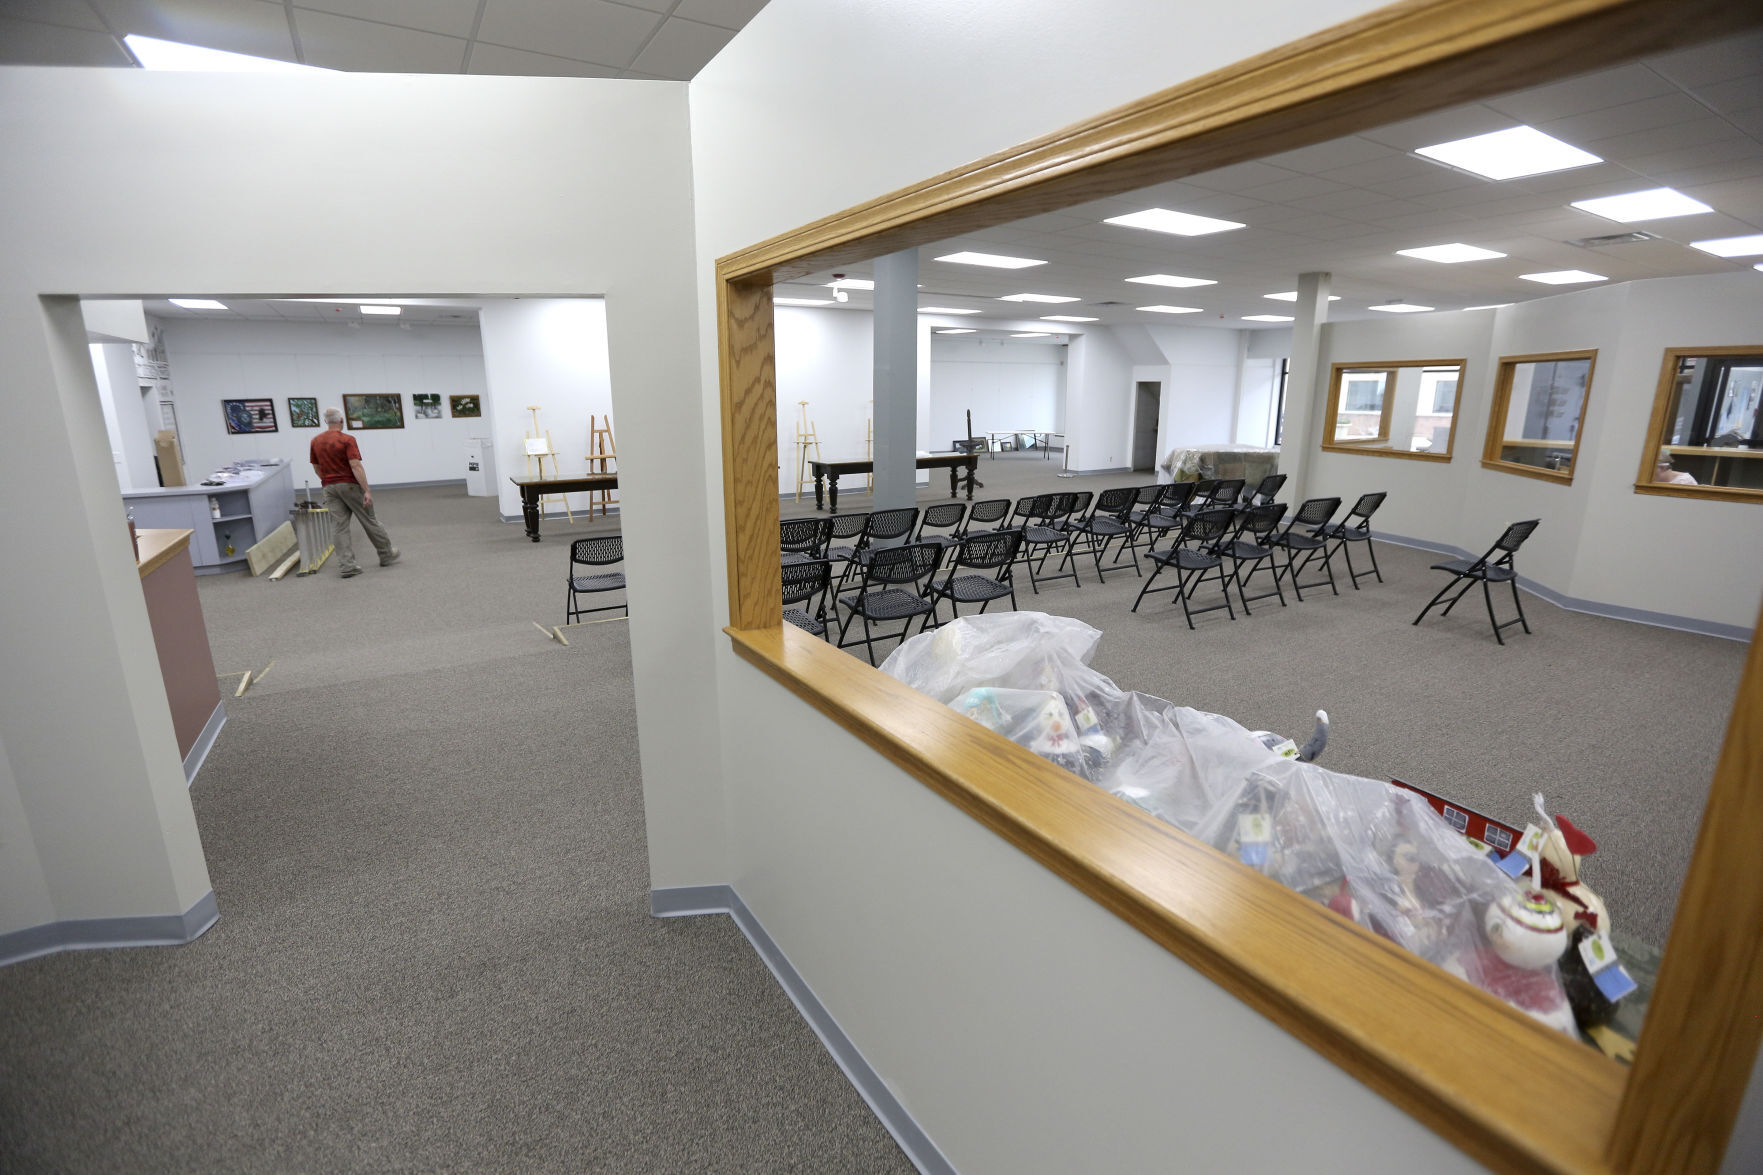 A look inside the newly renovated Maquoketa Art Experience, which shares a building with Maquoketa Chamber of Commerce, on Tuesday.    PHOTO CREDIT: Dave Kettering